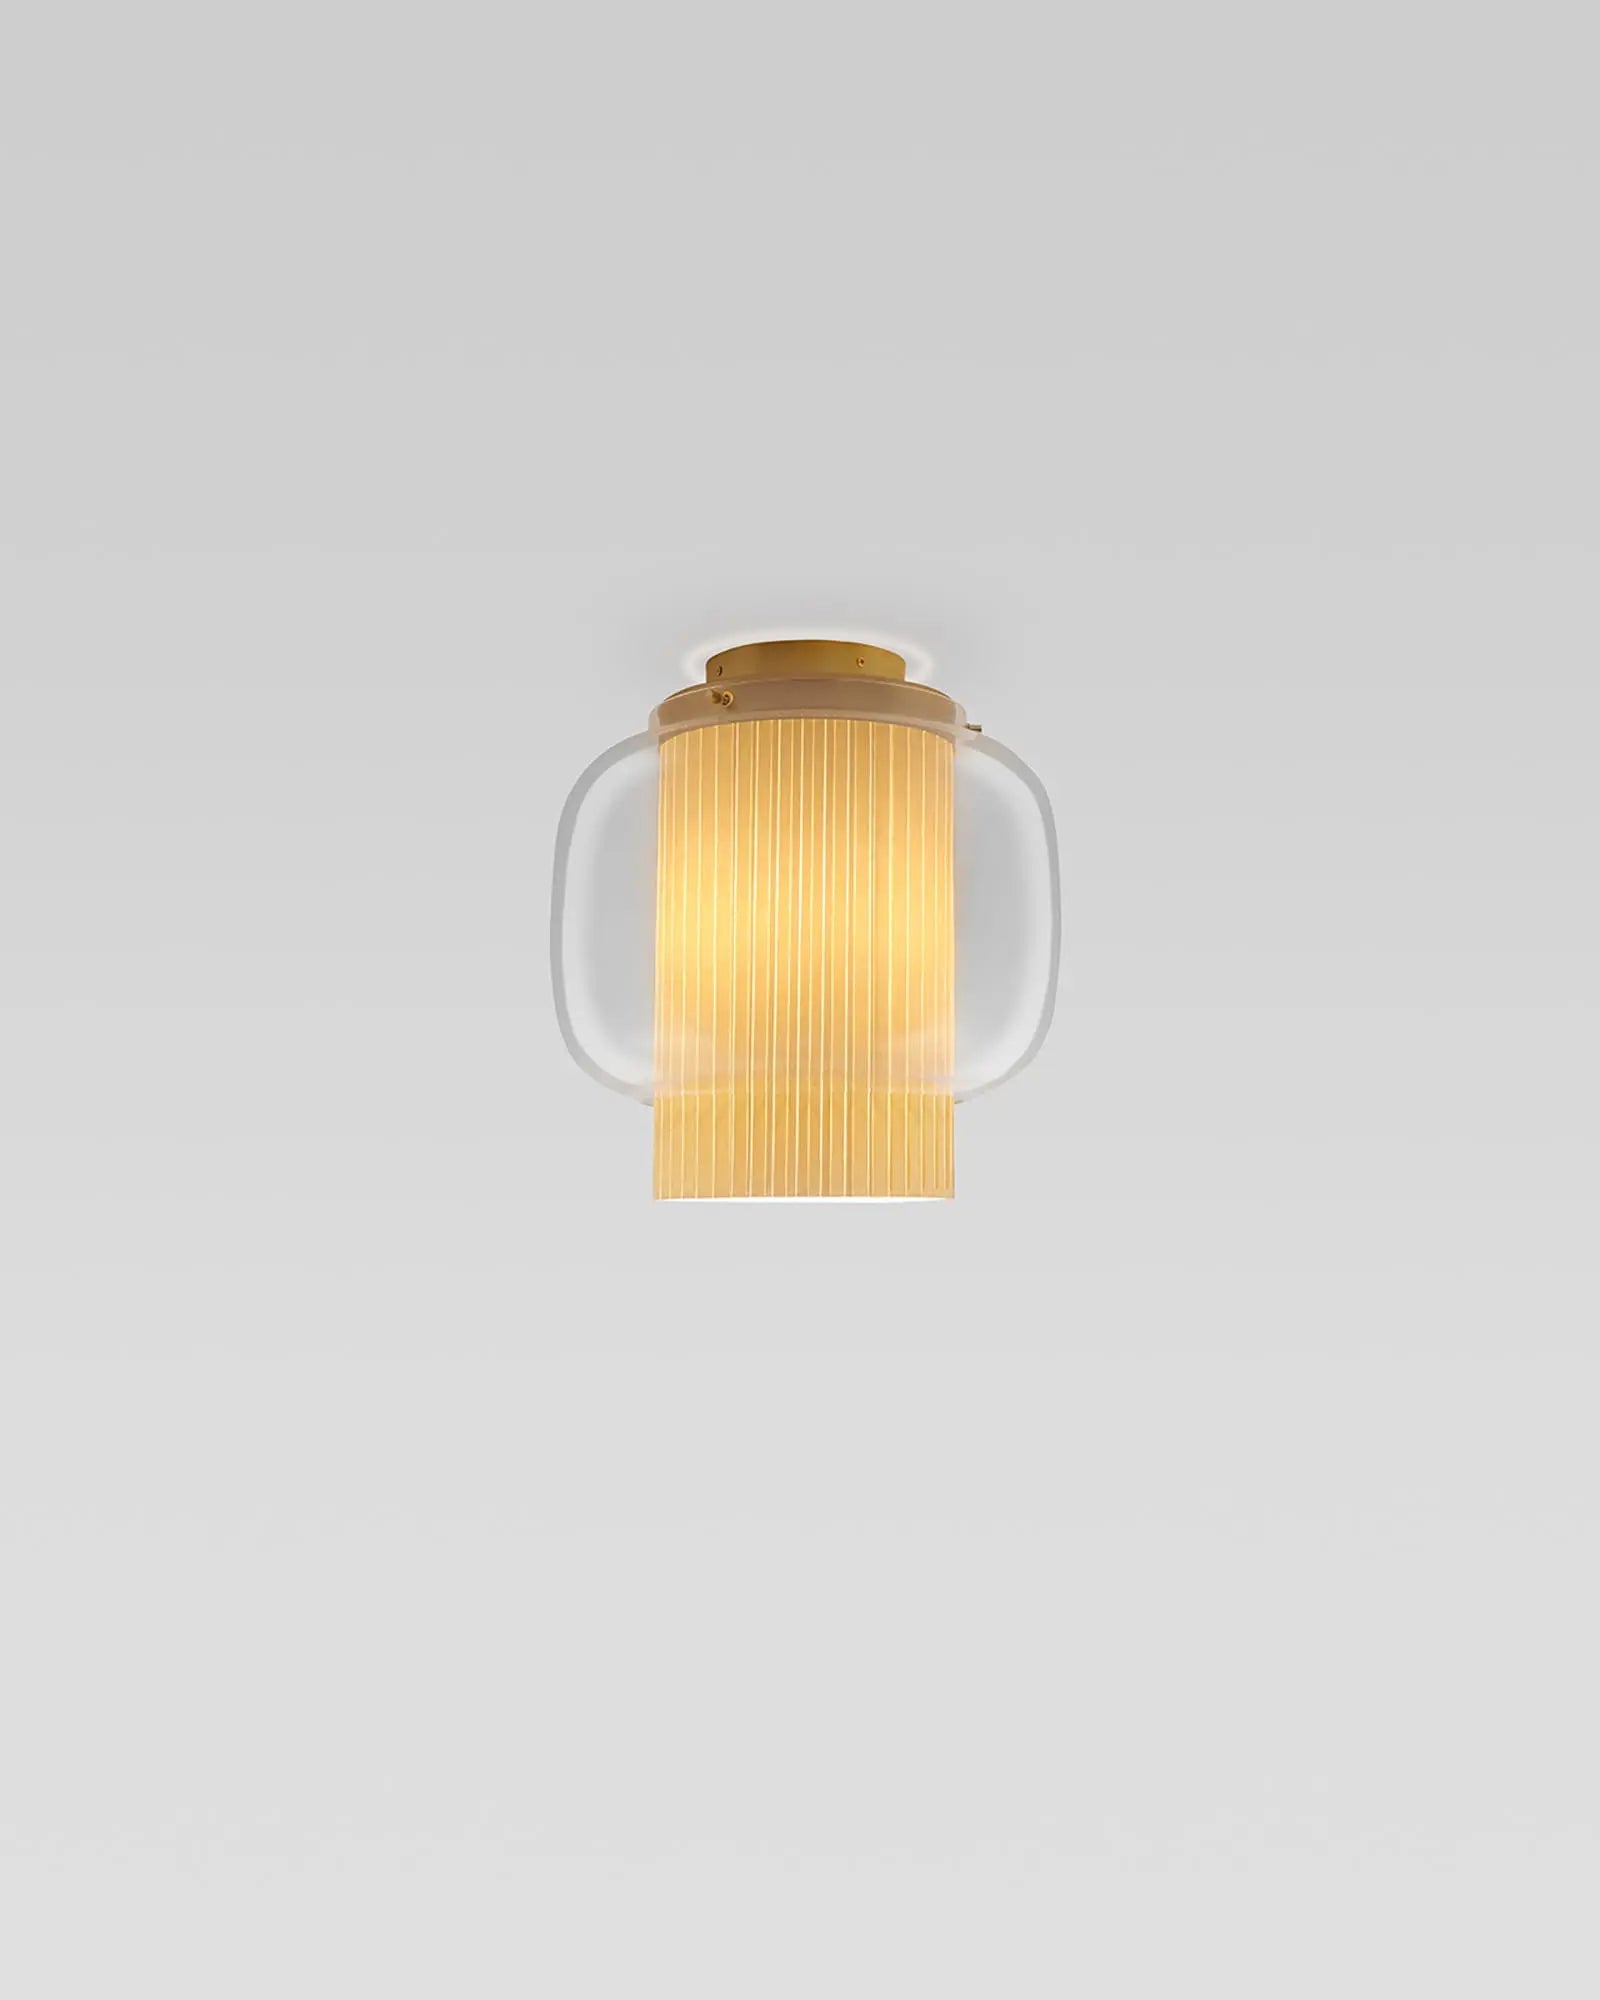 Manila Ceiling Light in gold with beige fabric large